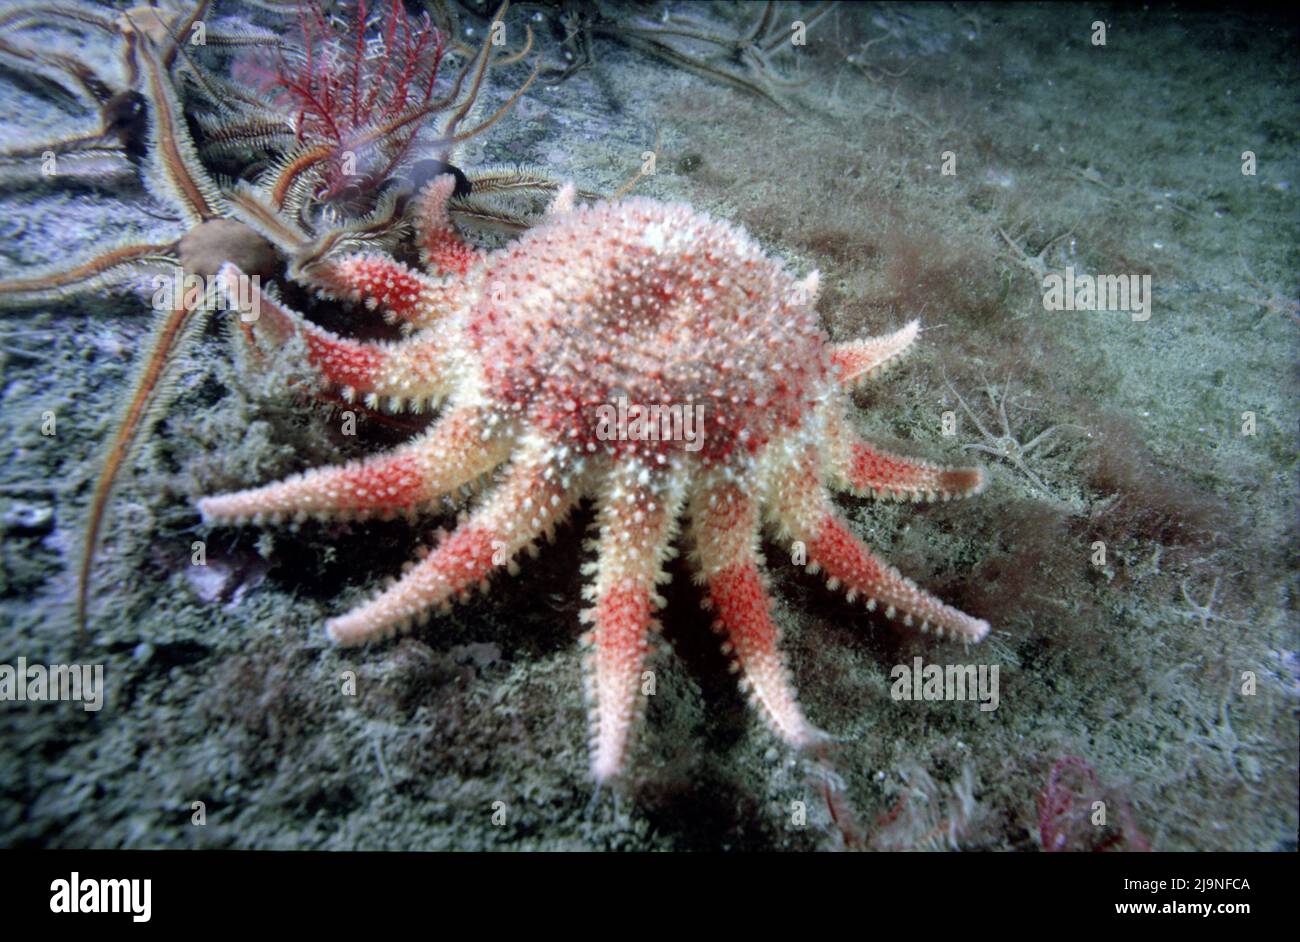 Common Sunstar or Crossaster are Echinoderms. Red and orange feed by extruding their stomachs.  Brittle stars and red feather star  St Abbs.UK 1988 Stock Photo